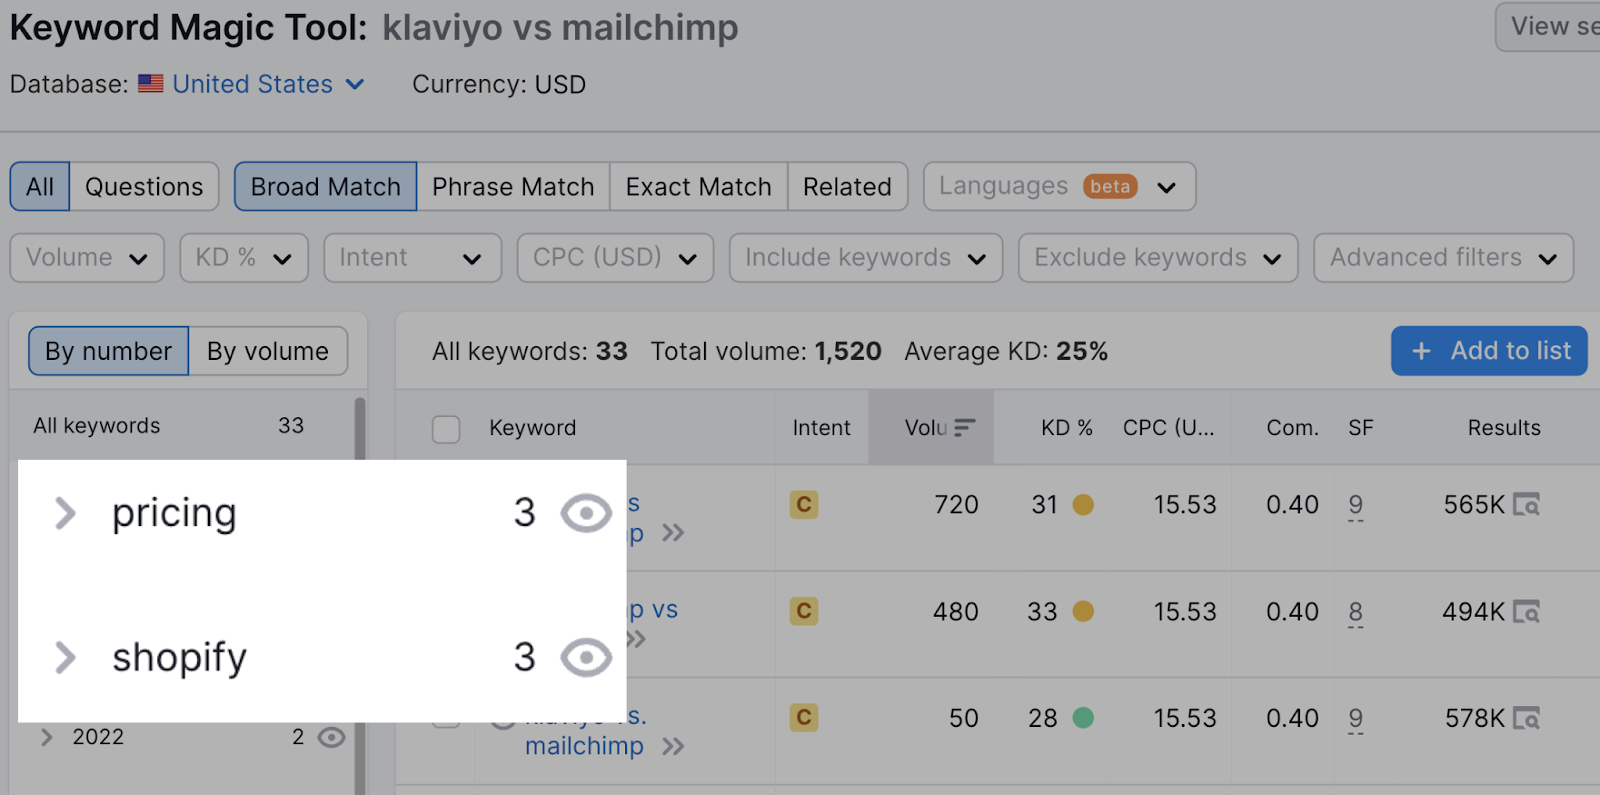 Keyword Magic Tool results for "Klaviyo vs mailchimp" with "pricing" and "Shopify" highlighted